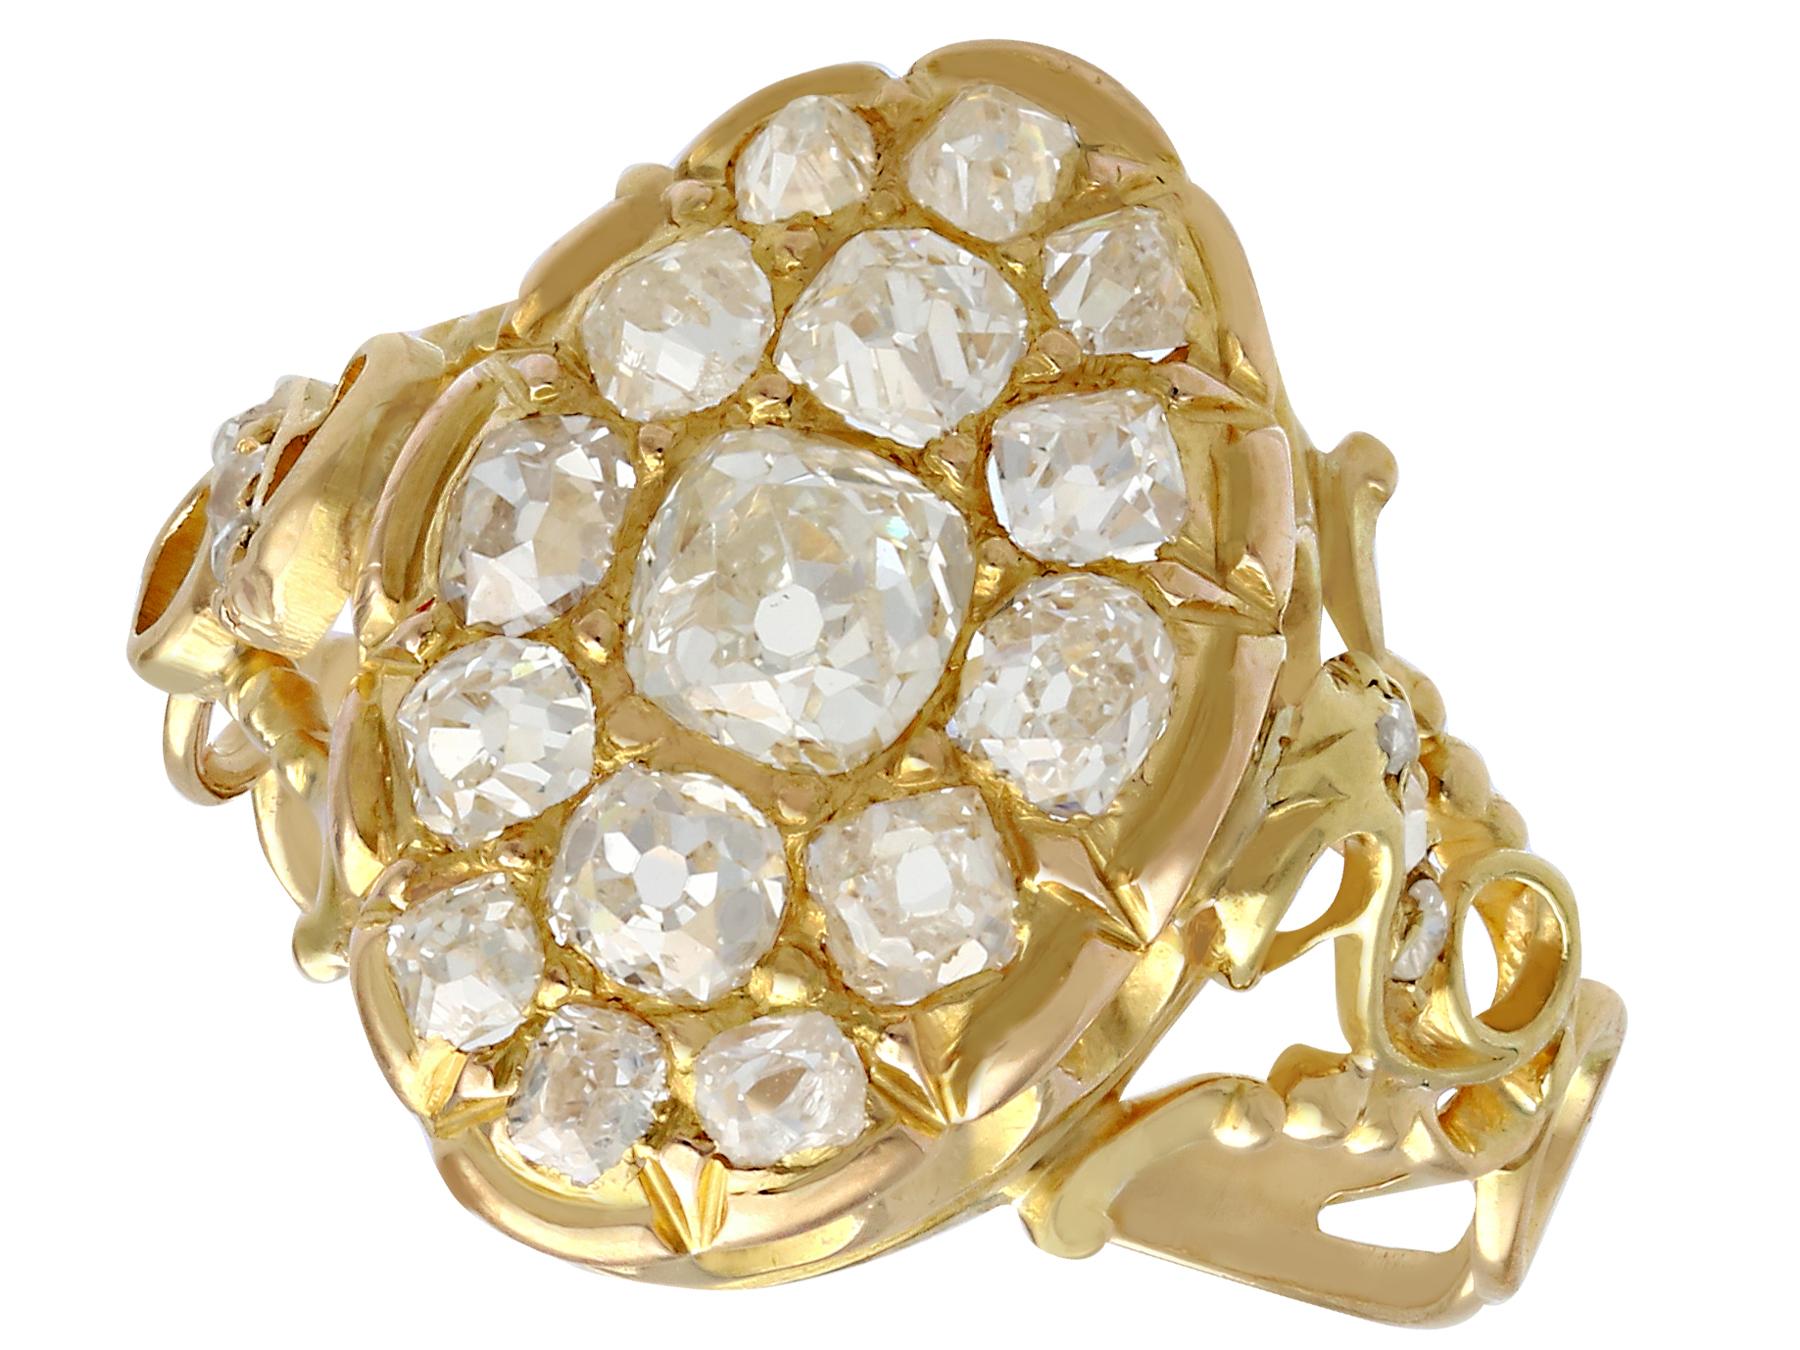 An impressive antique Victorian 1.51 carat diamond and 18 karat yellow gold marquise shaped dress ring; part of our diverse antique jewelry and estate jewelry collections.

This fine and impressive antique Victorian diamond ring has been crafted in